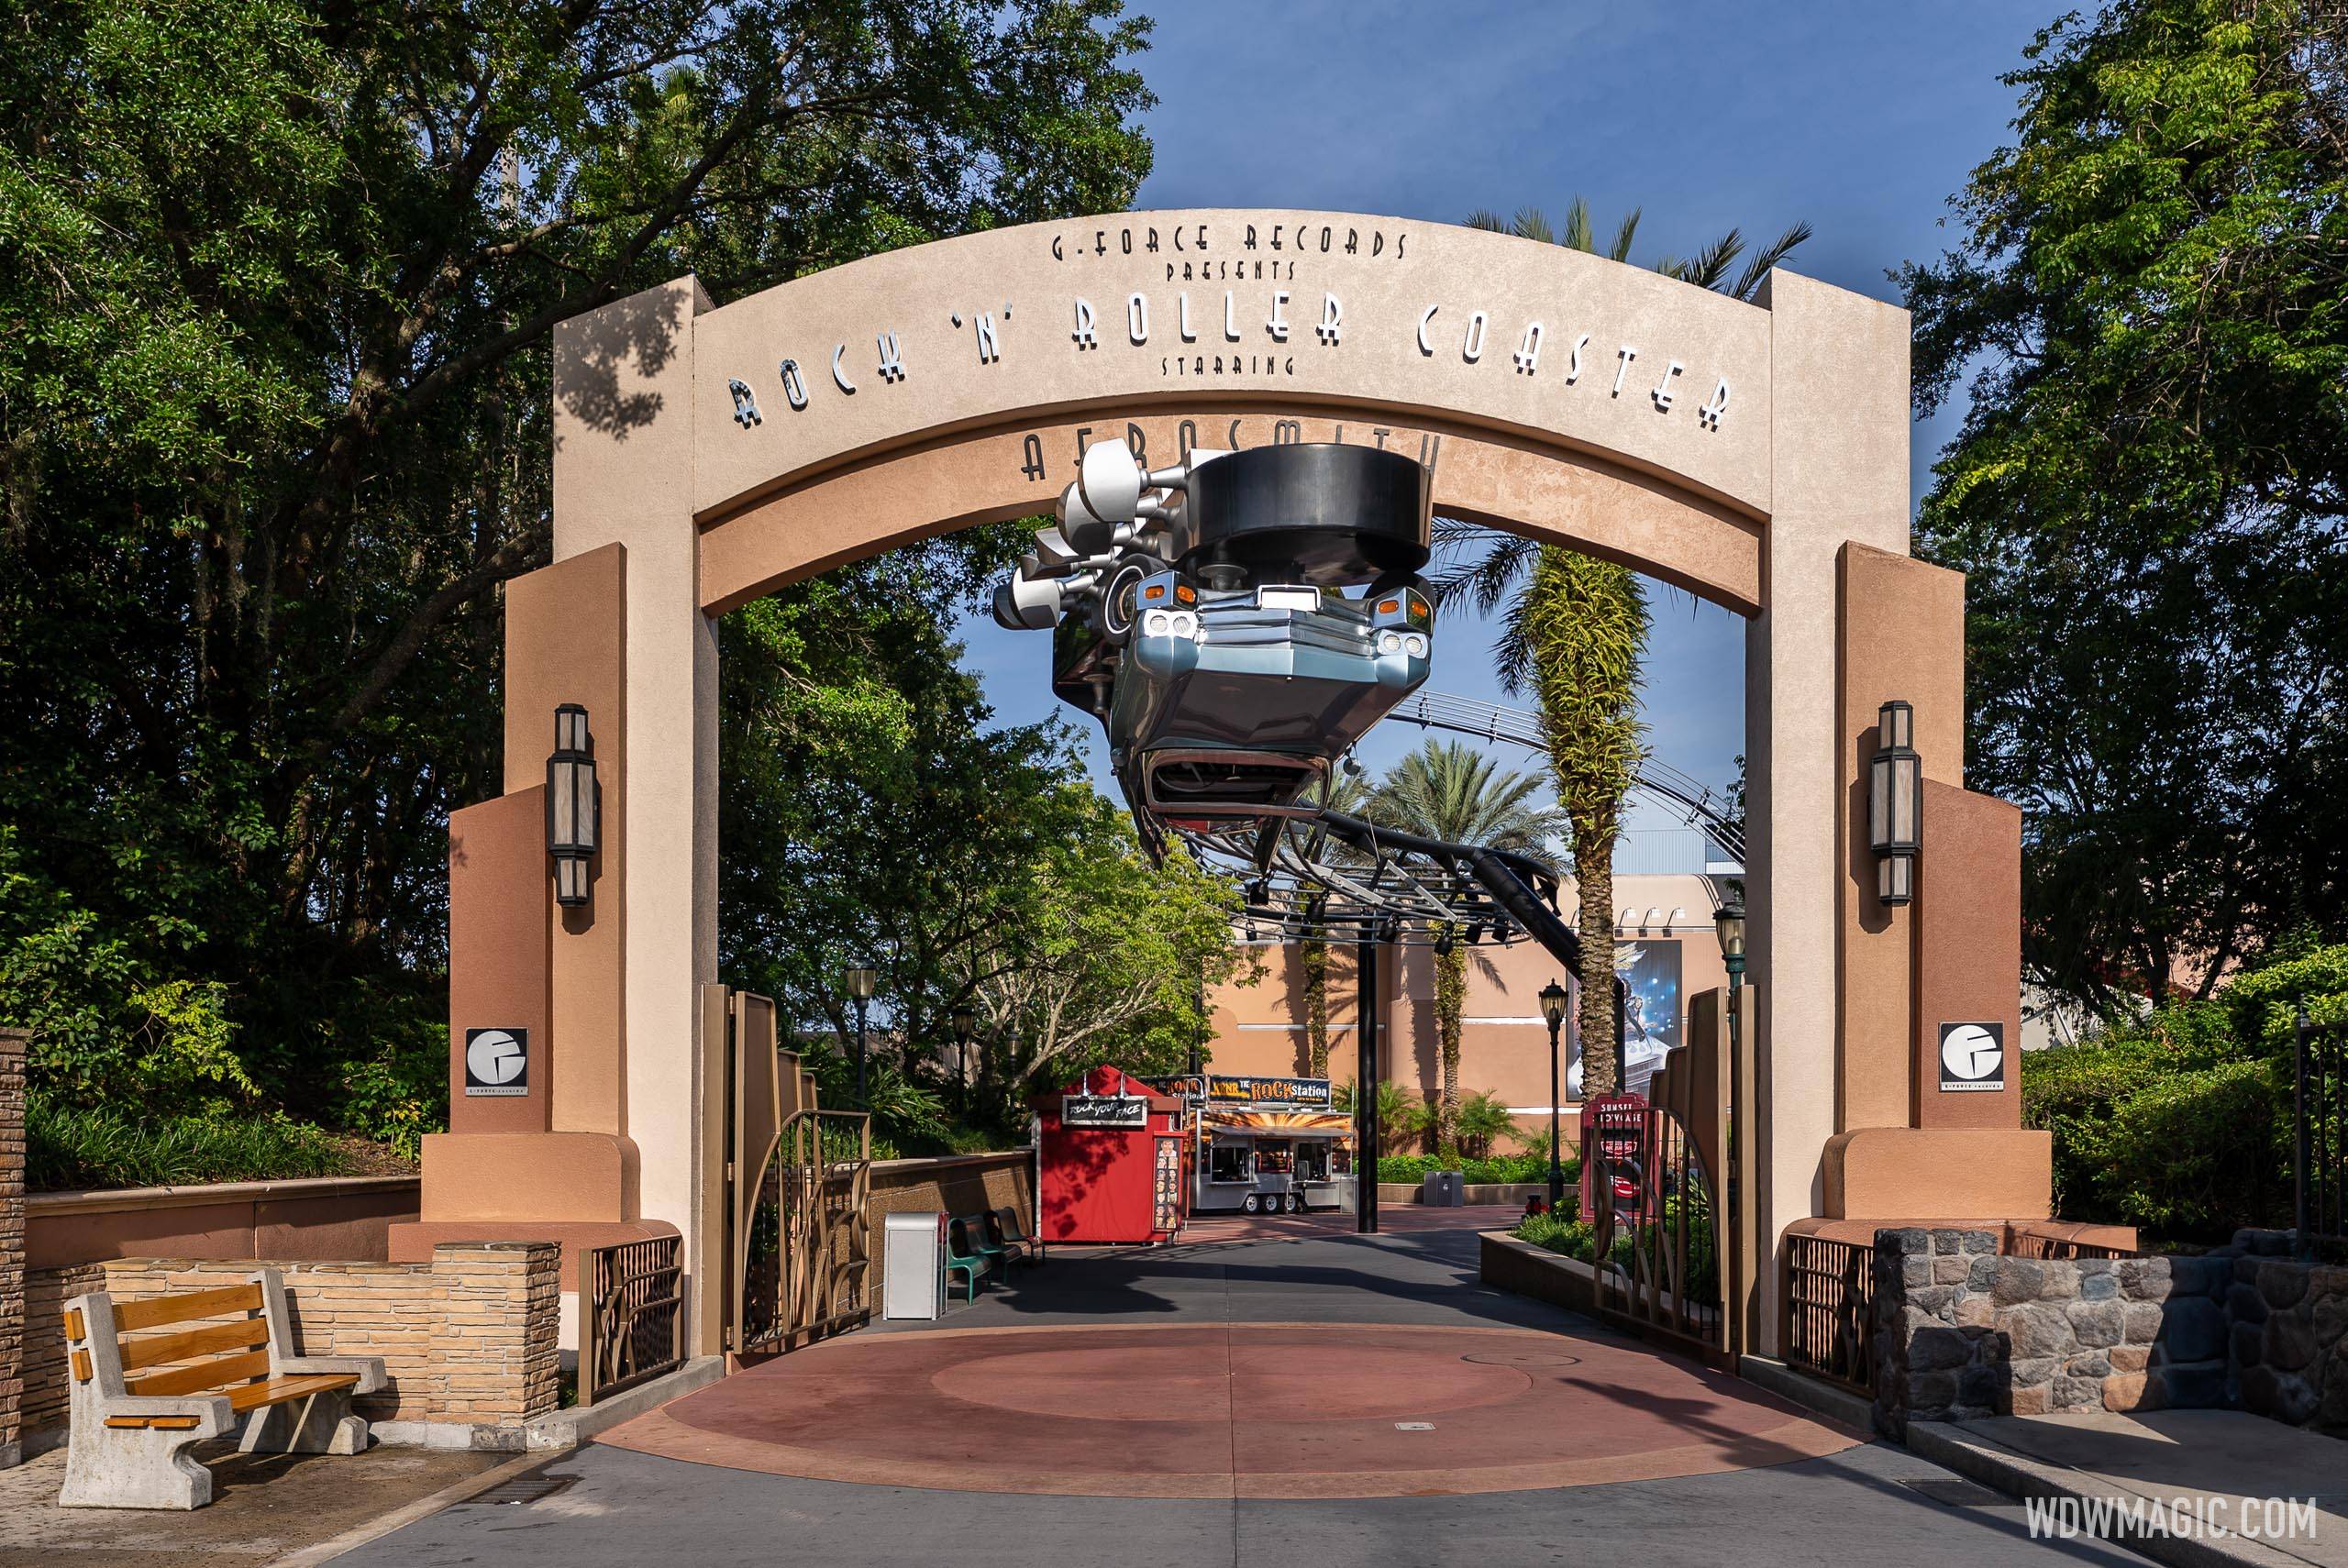 Signed Aerosmith Photo Still Missing, Wall Covered in Dust at Rock 'n' Roller  Coaster in Disney's Hollywood Studios - WDW News Today